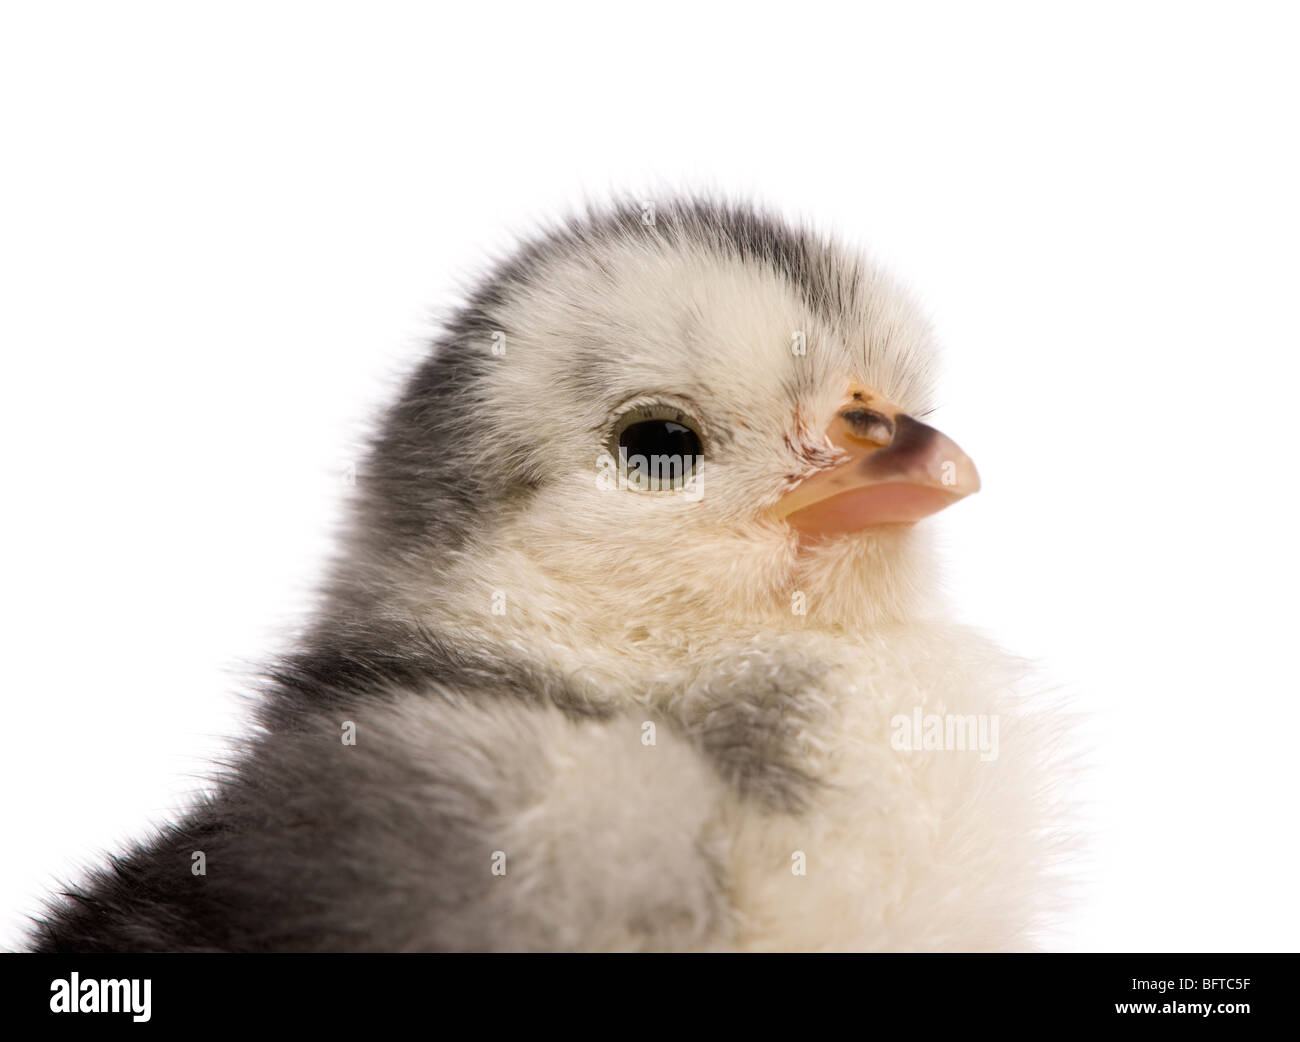 Chick, 2 jours, in front of white background, studio shot Banque D'Images